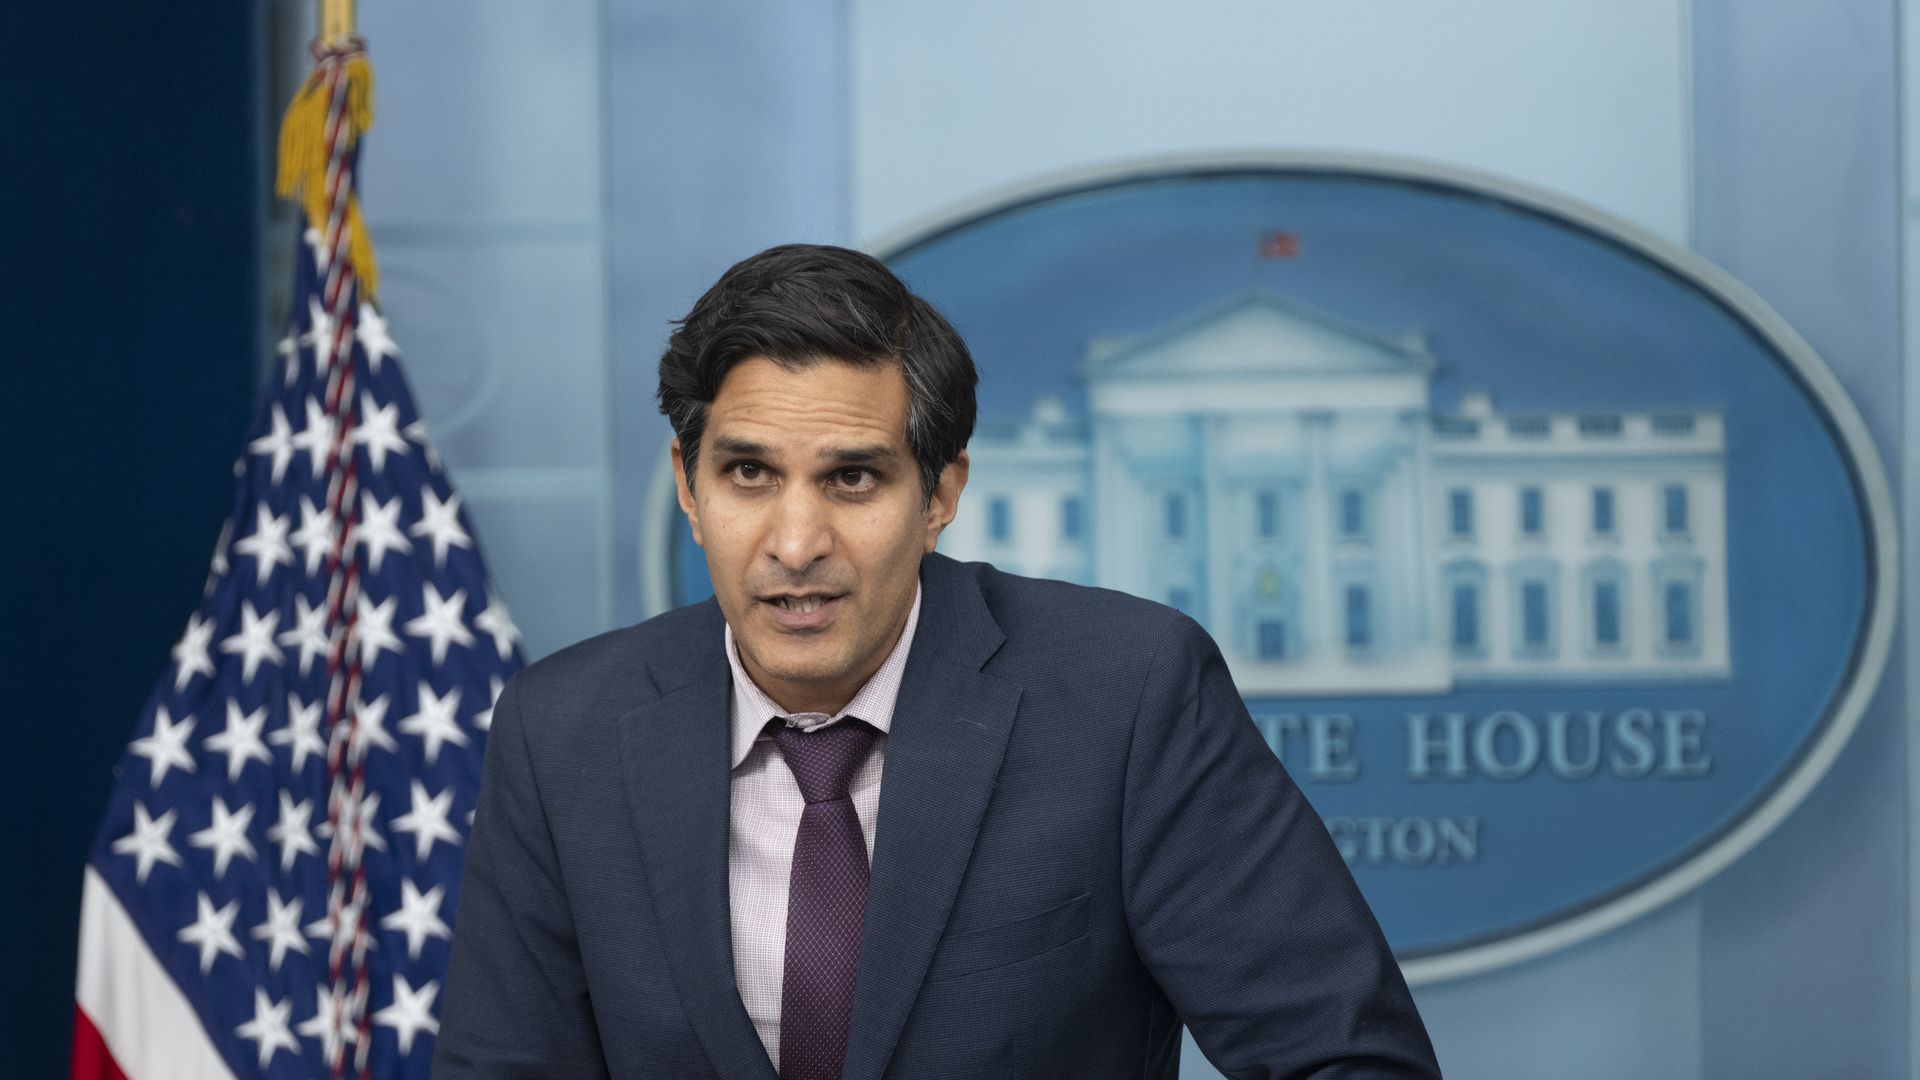 A middle-age male with a blue suit leans over the White House lectern in a press briefing